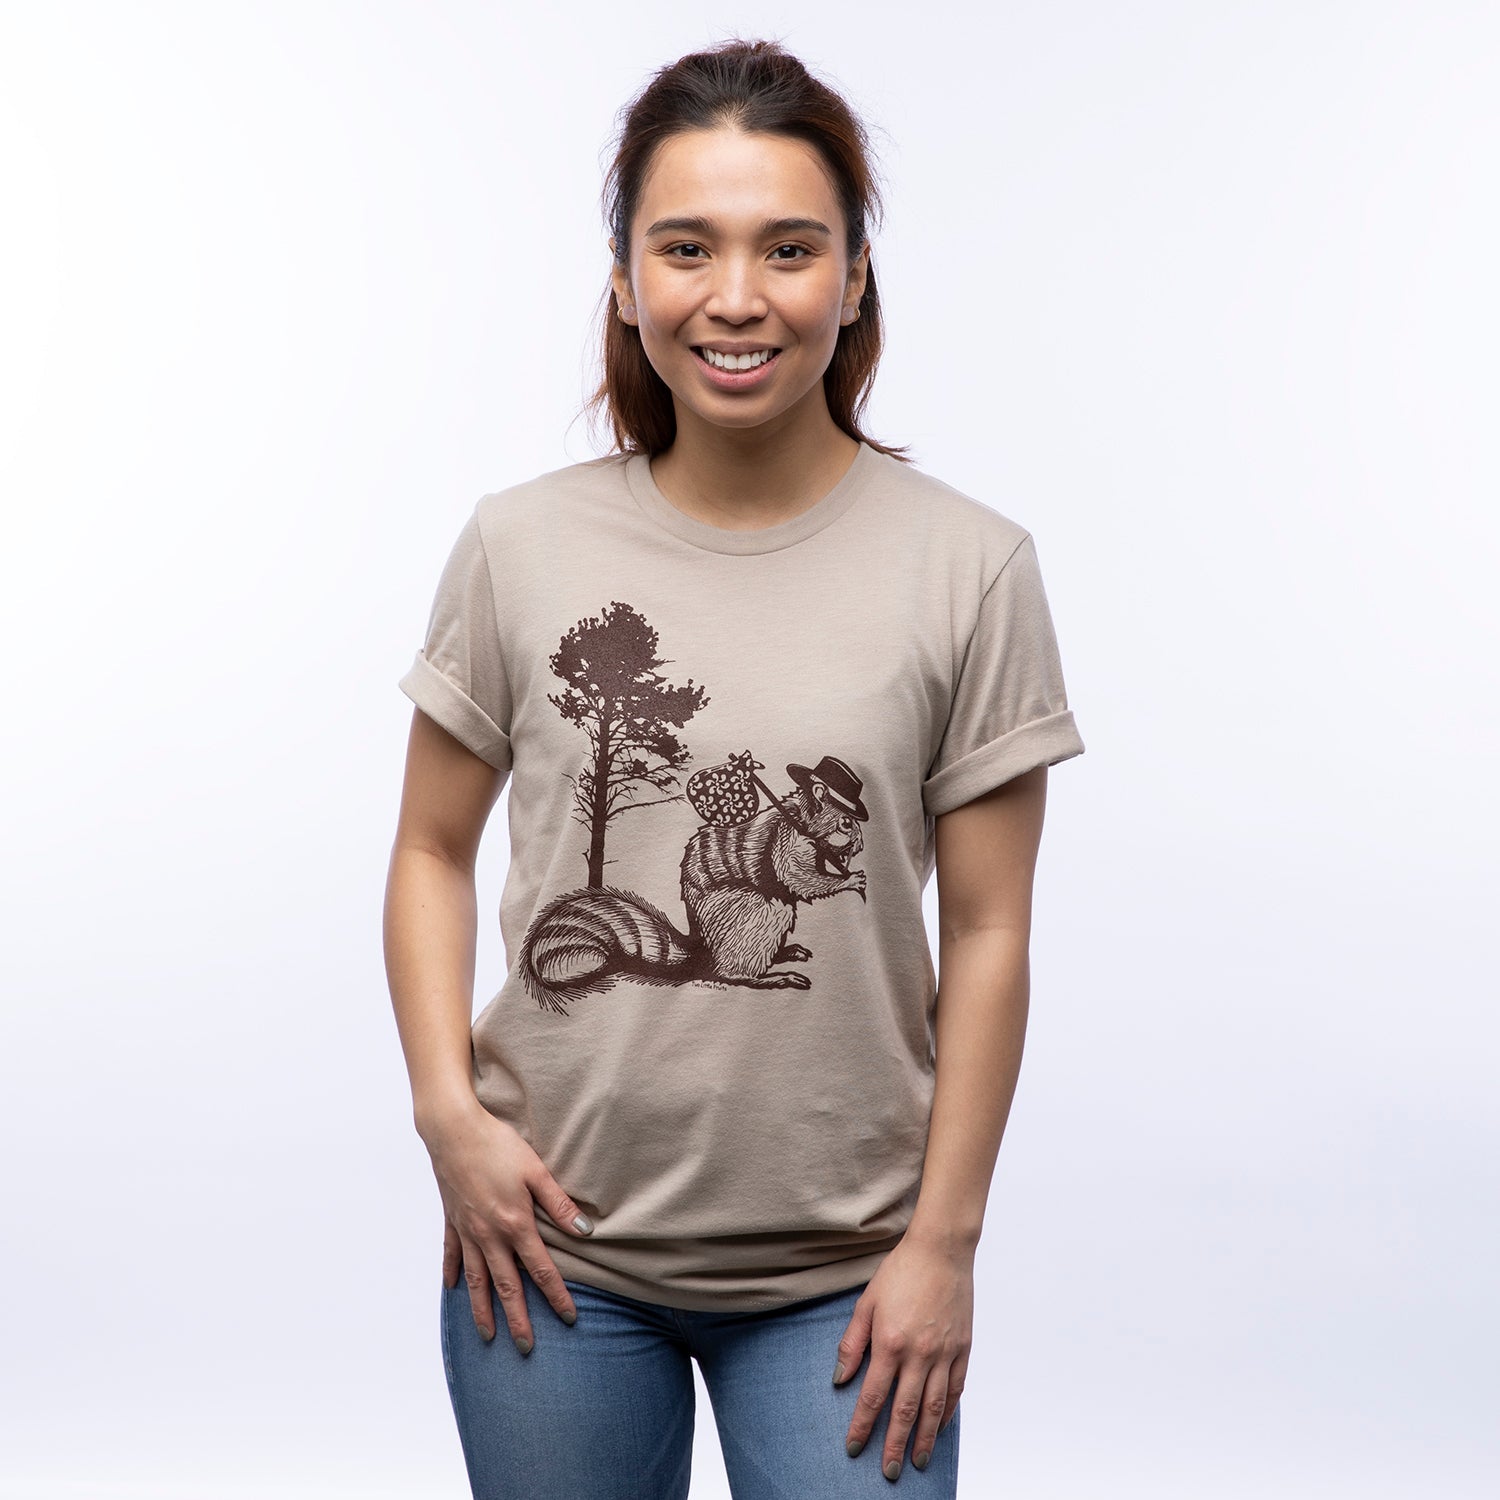 Hobo Squirrel Tee - Tan - Tee Shirts - Two Little Fruits - Two Little Fruits